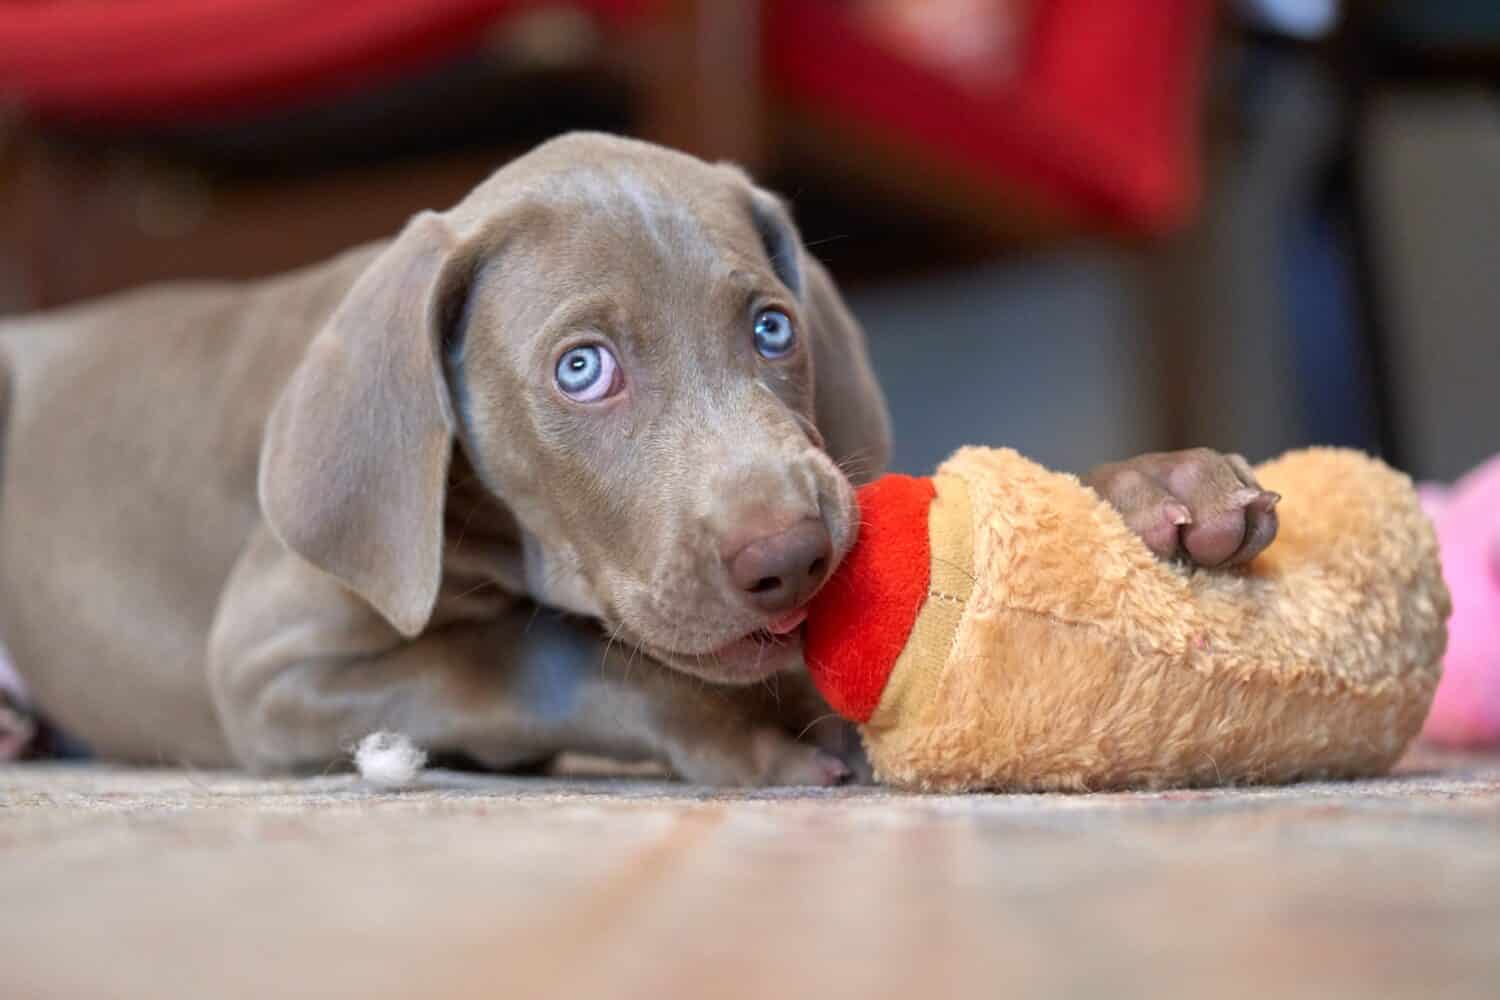 A Weimaraner puppy chewing on a plush toy